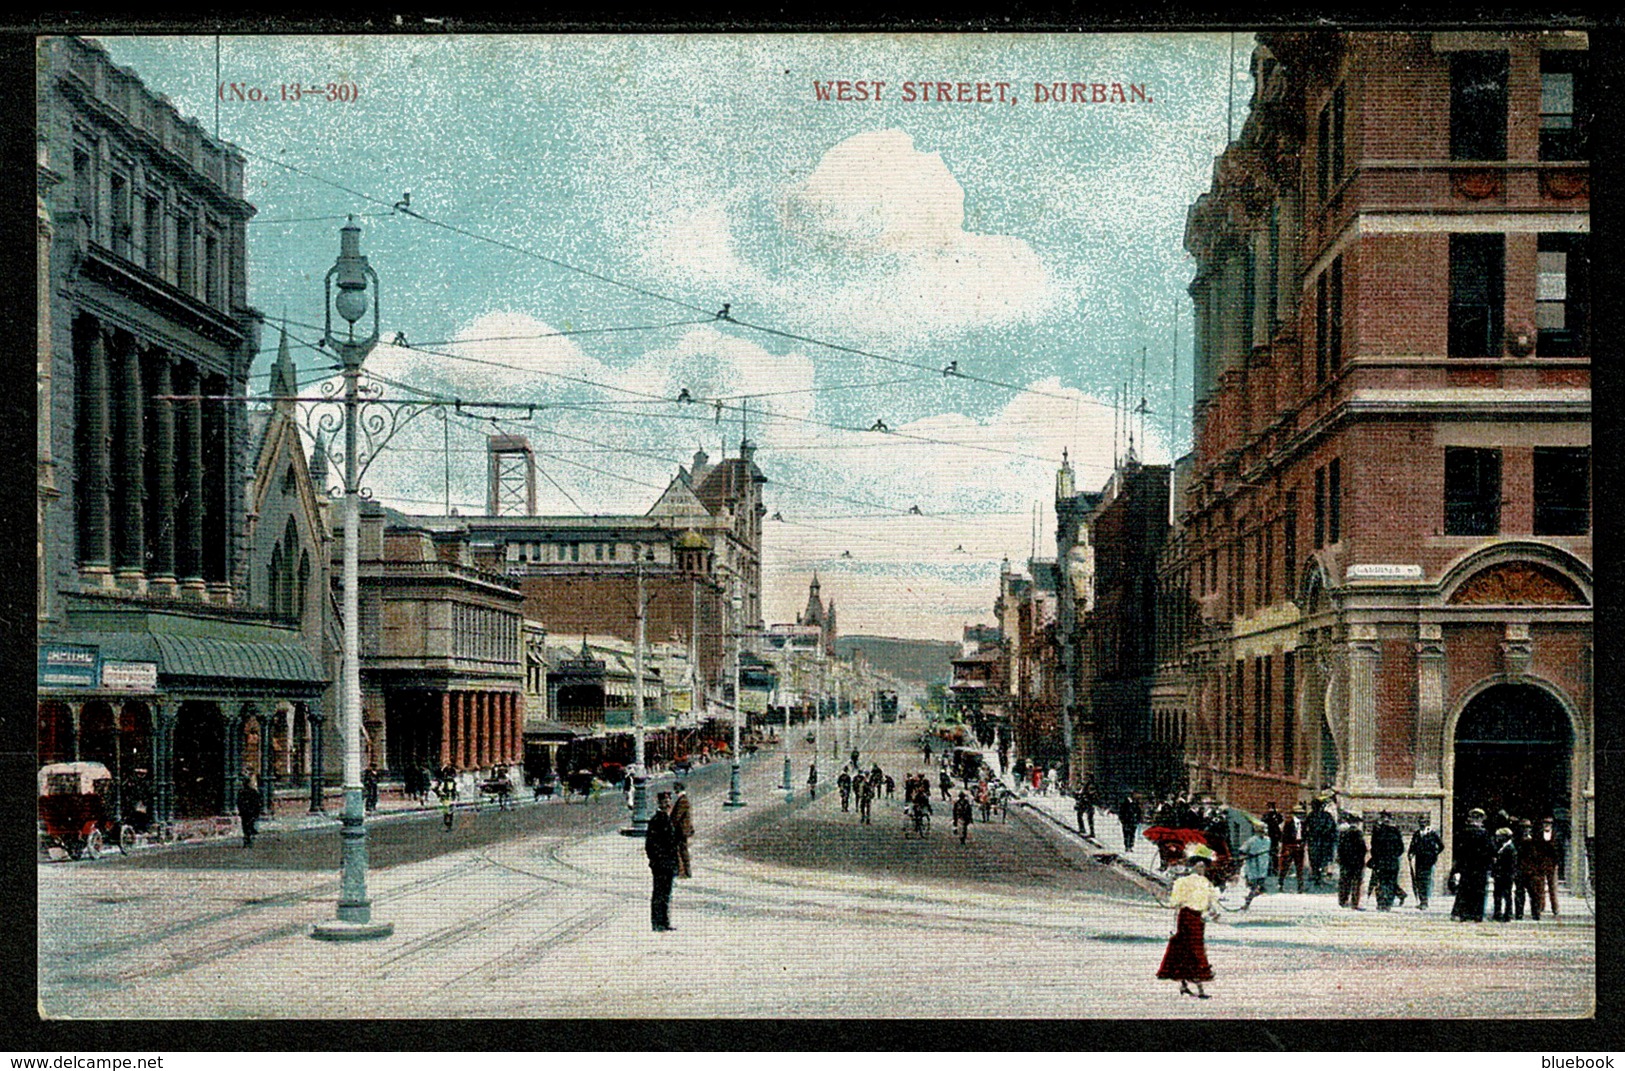 Ref 1320 - Early Postcard - West Street - Durban South Africa - South Africa